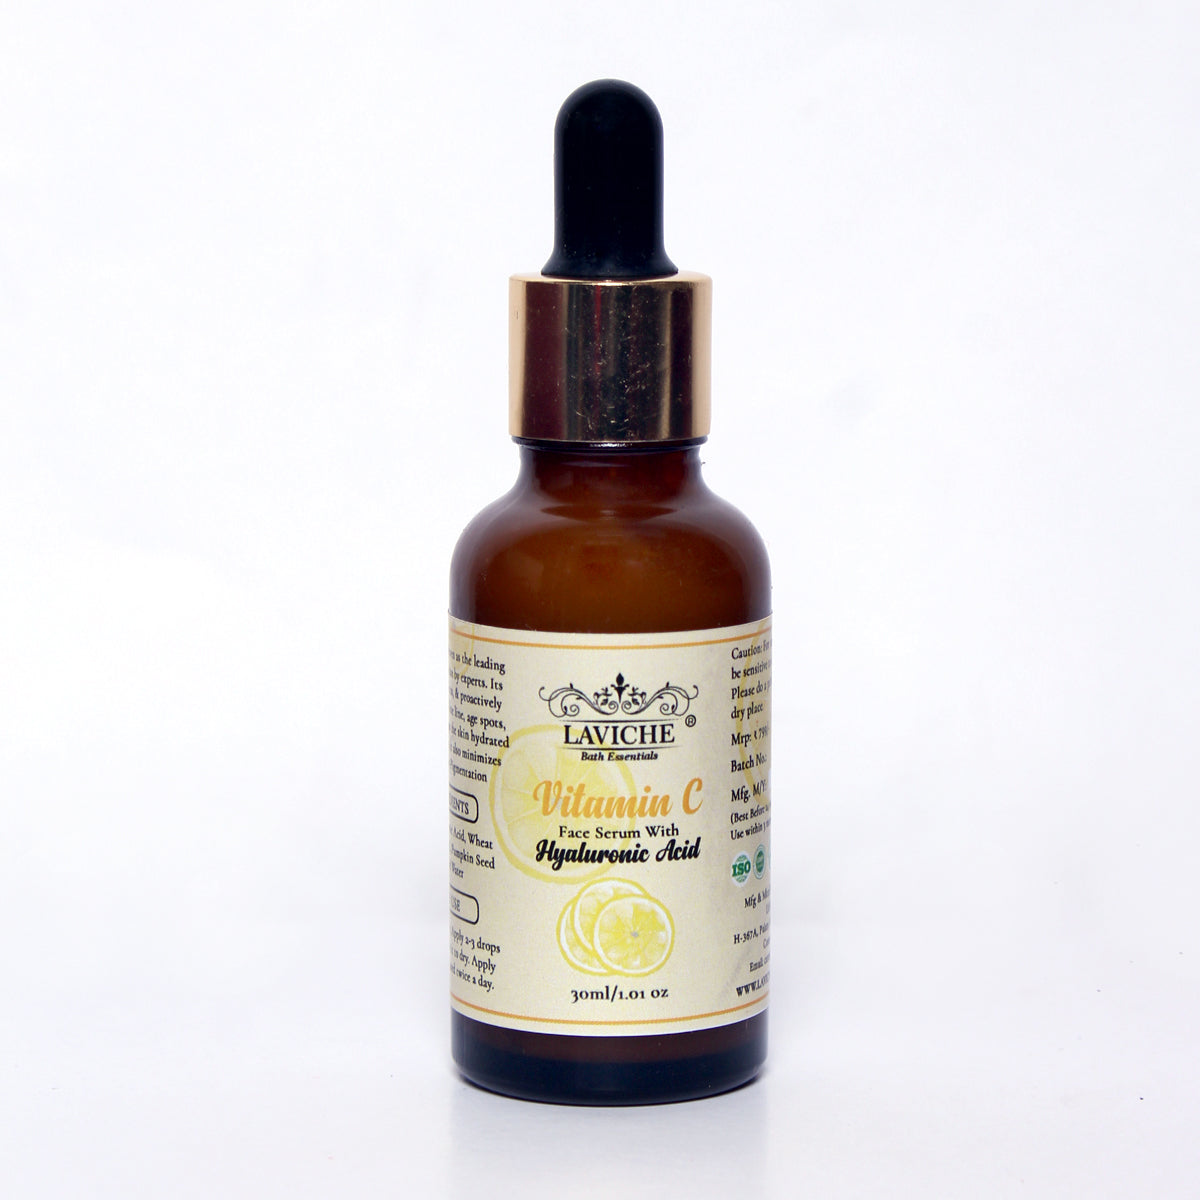 Vitamin C Face Serum with Hyaluronic Acid